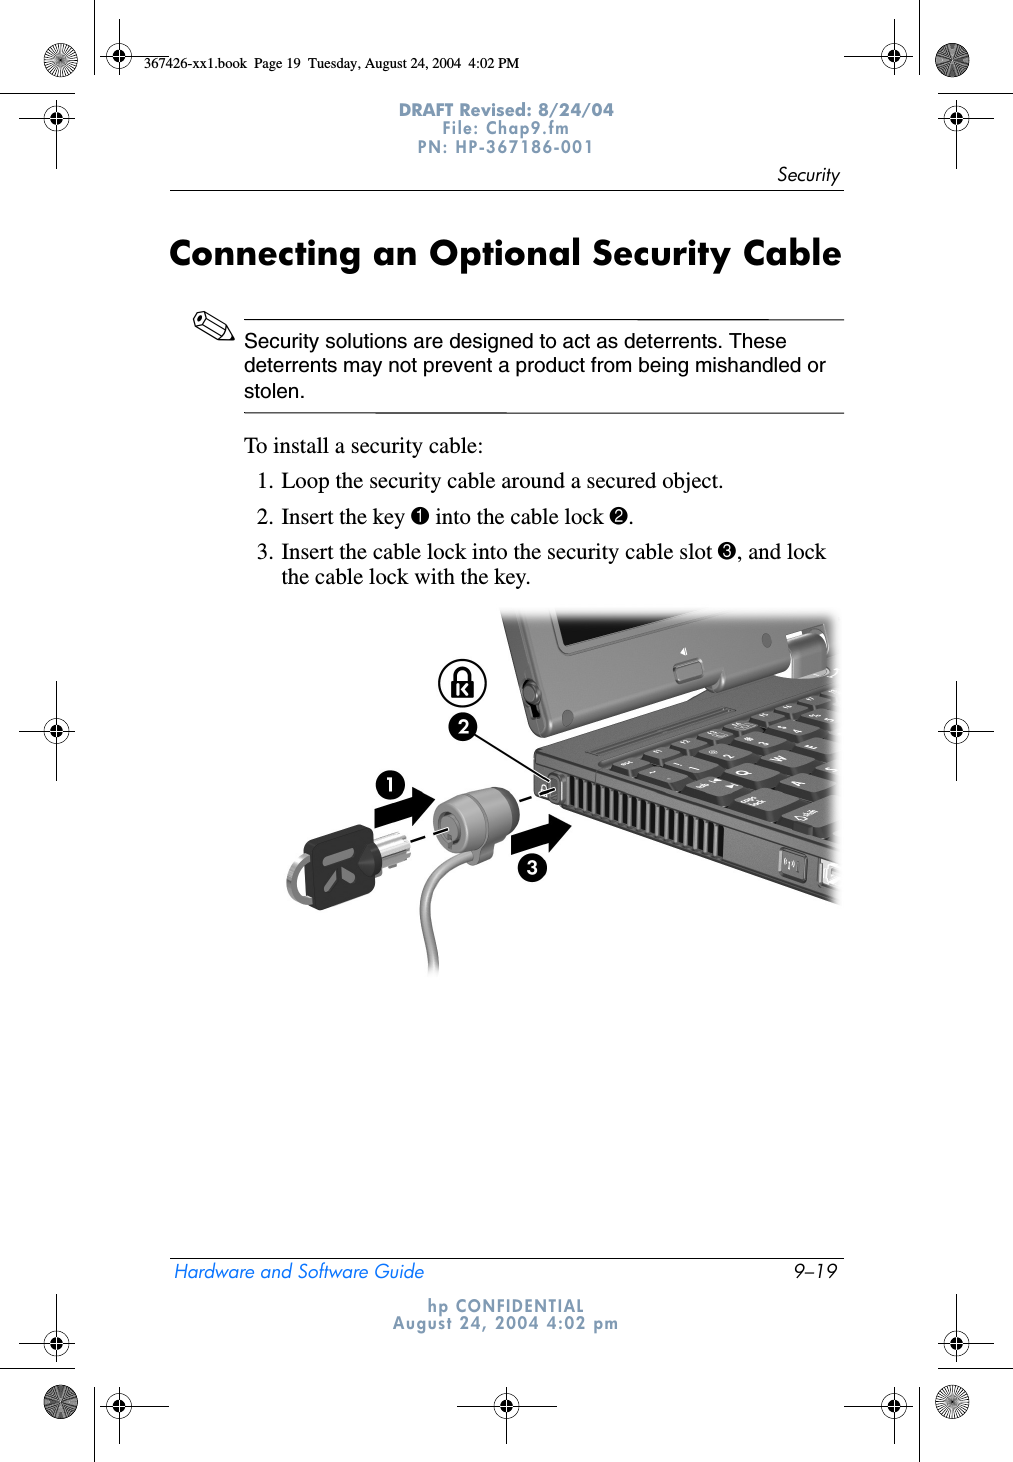 SecurityHardware and Software Guide 9–19DRAFT Revised: 8/24/04File: Chap9.fm PN: HP-367186-001 hp CONFIDENTIALAugust 24, 2004 4:02 pmConnecting an Optional Security Cable✎Security solutions are designed to act as deterrents. These deterrents may not prevent a product from being mishandled or stolen.To install a security cable:1. Loop the security cable around a secured object.2. Insert the key 1 into the cable lock 2.3. Insert the cable lock into the security cable slot 3, and lock the cable lock with the key.367426-xx1.book  Page 19  Tuesday, August 24, 2004  4:02 PM